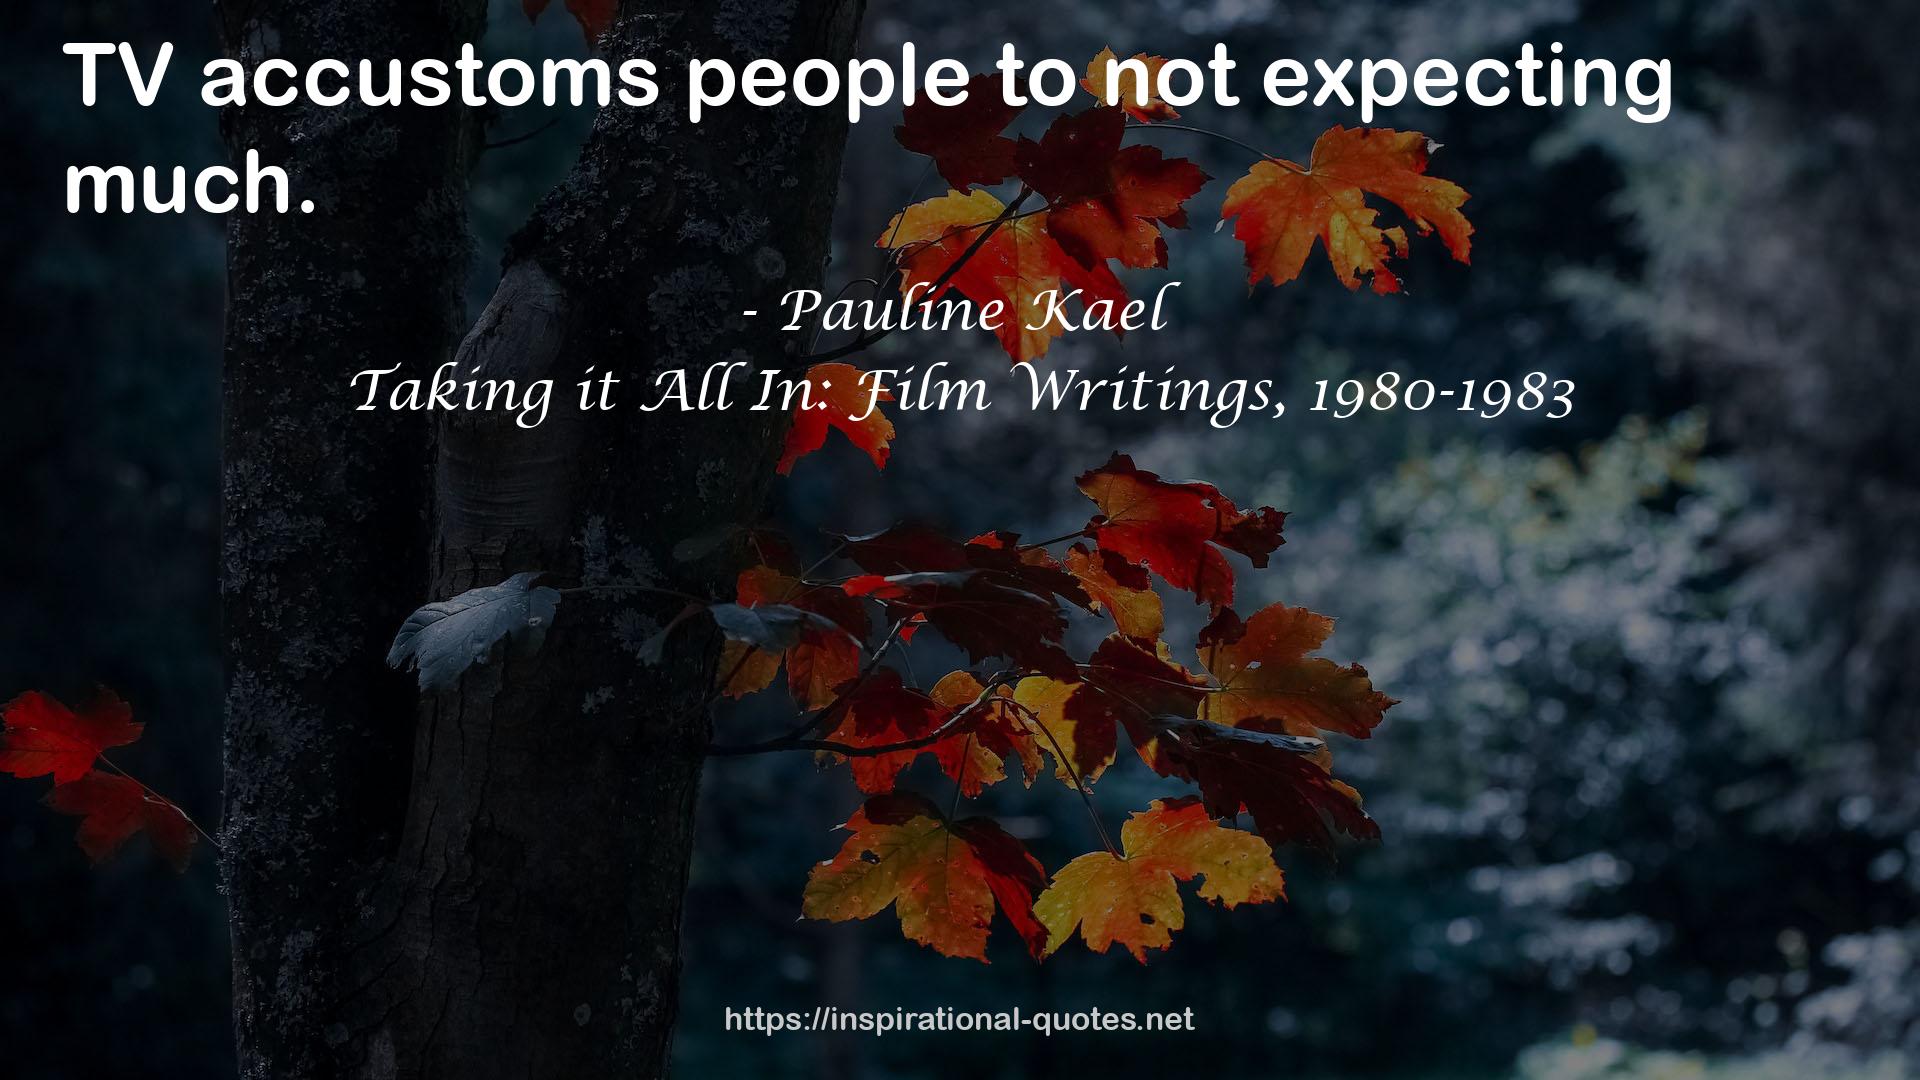 Taking it All In: Film Writings, 1980-1983 QUOTES